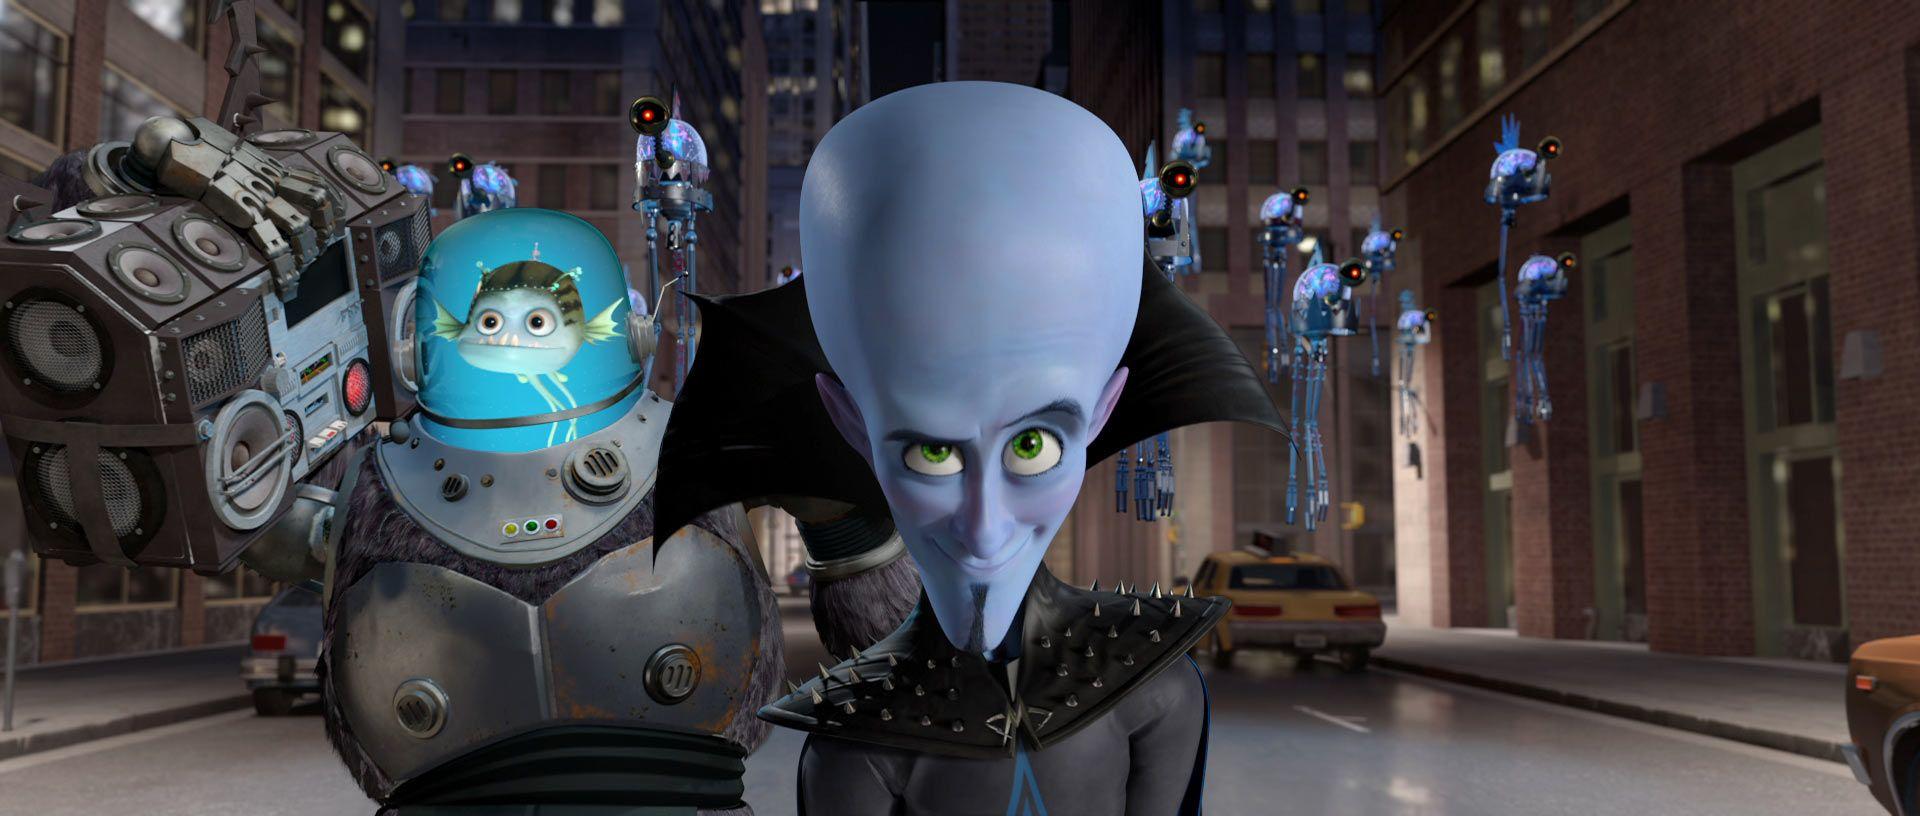 Megamind and Minion Desktop Wallpapers.